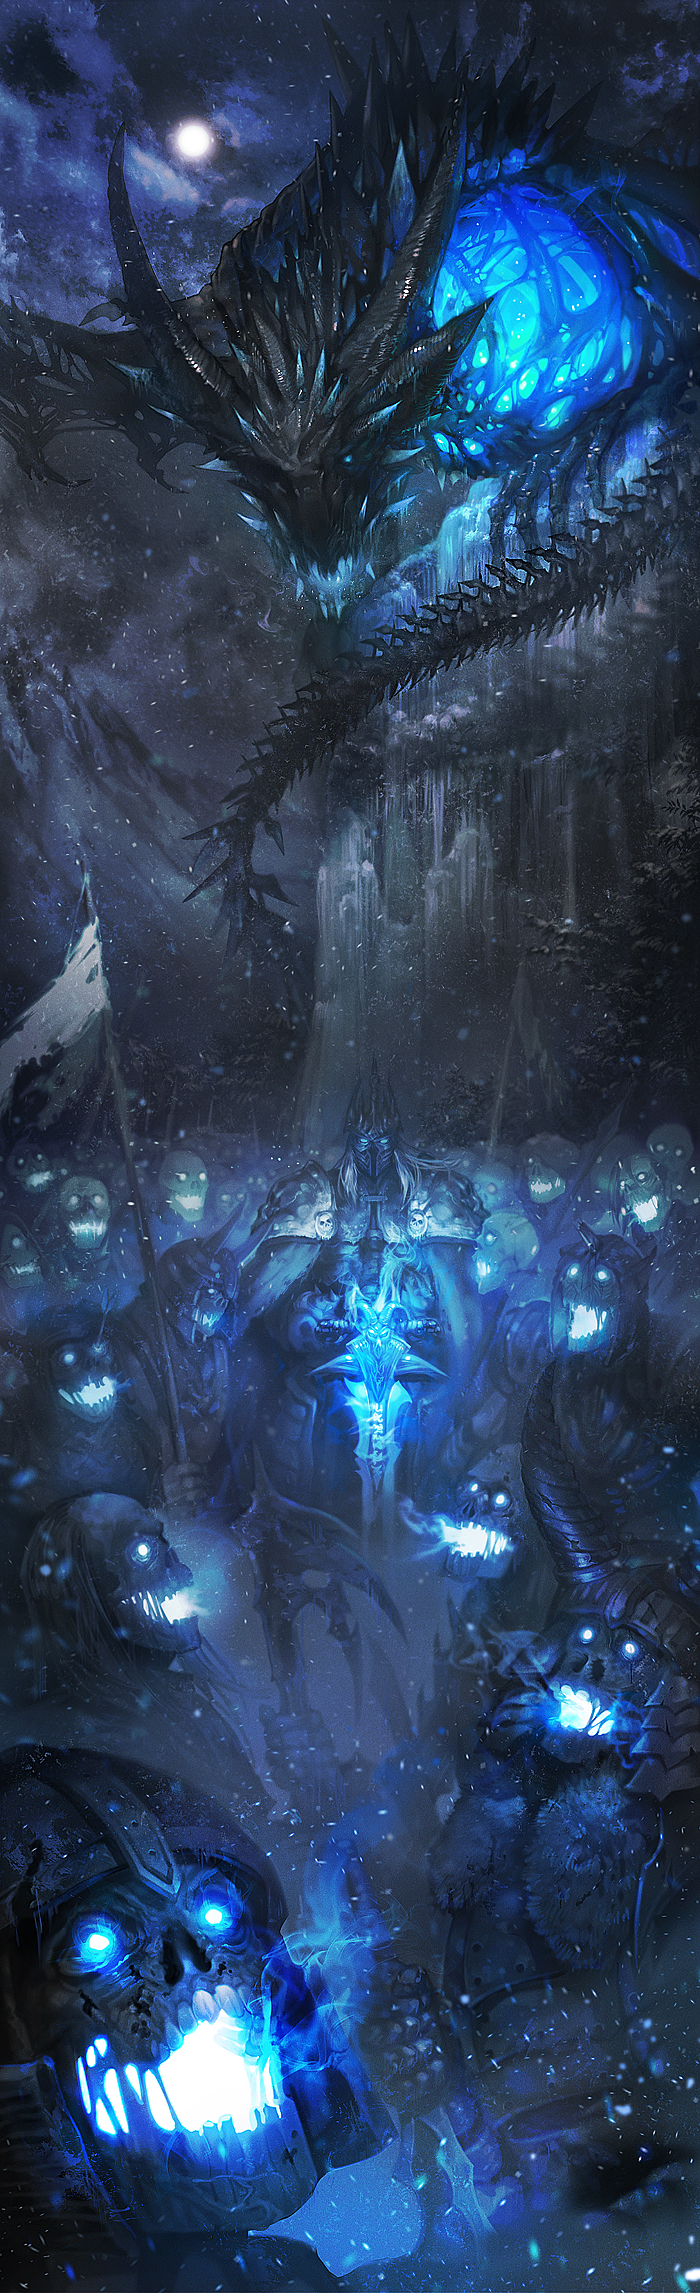 1boy armor arthas_menethil banner blue choebab clouds dragon frostmourne full_moon glowing glowing_eyes glowing_mouth helmet highres lich_king moon night night_sky outdoors sindragosa sky snowing undead warcraft winter world_of_warcraft zombie